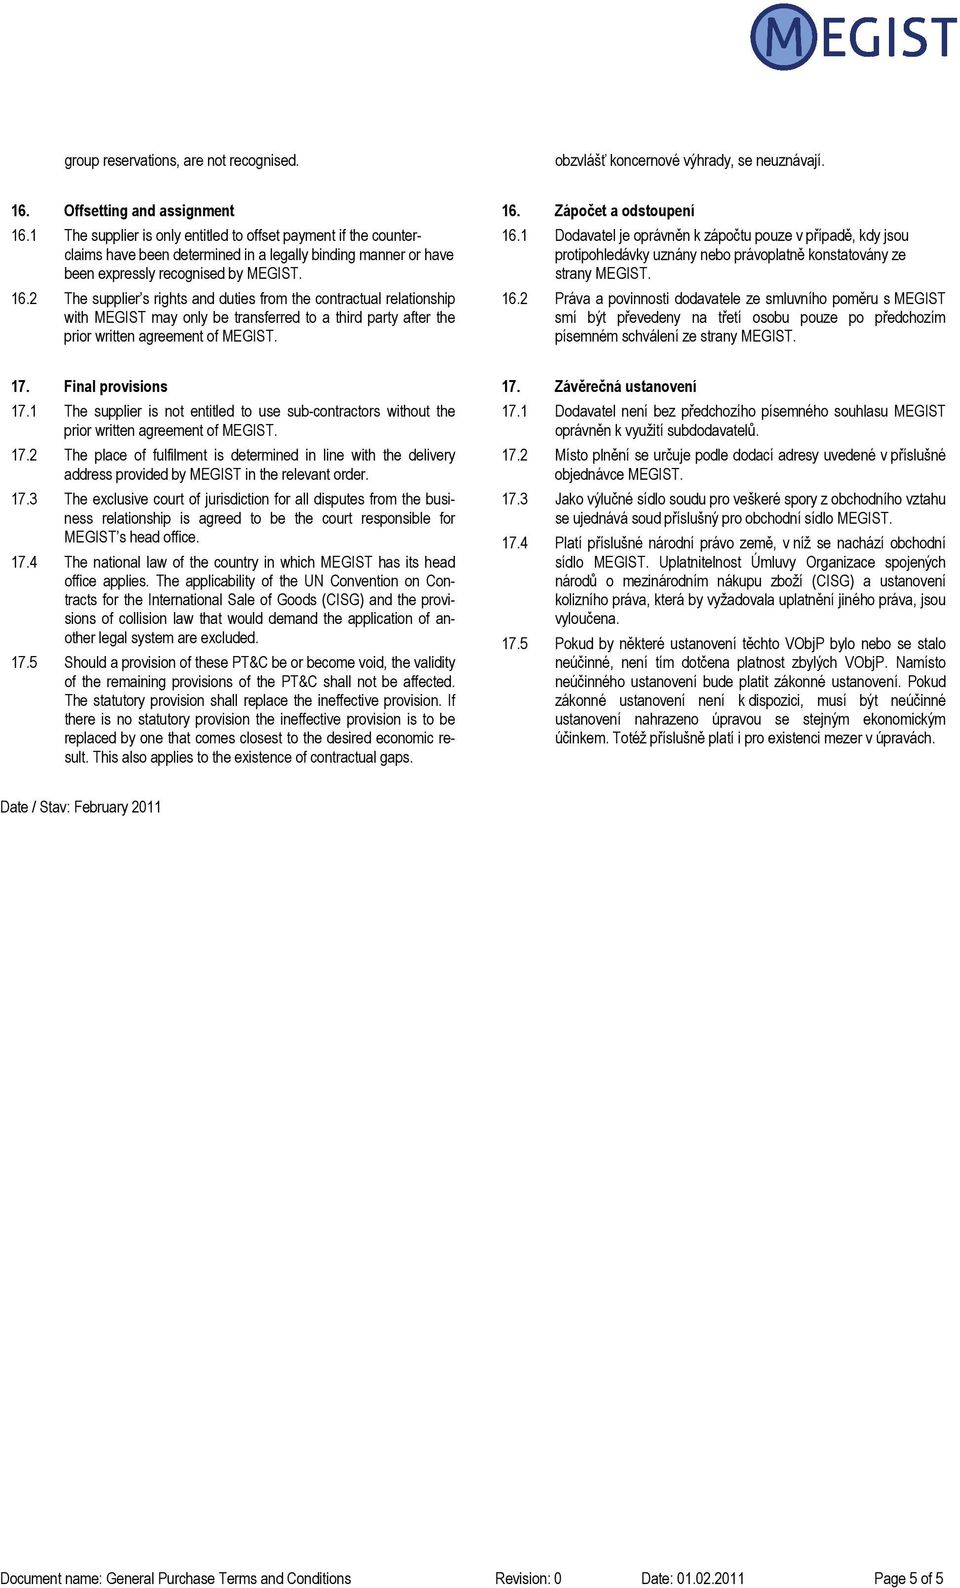 2 The supplier s rights and duties from the contractual relationship with MEGIST may only be transferred to a third party after the prior written agreement of MEGIST. 16. Zápočet a odstoupení 16.